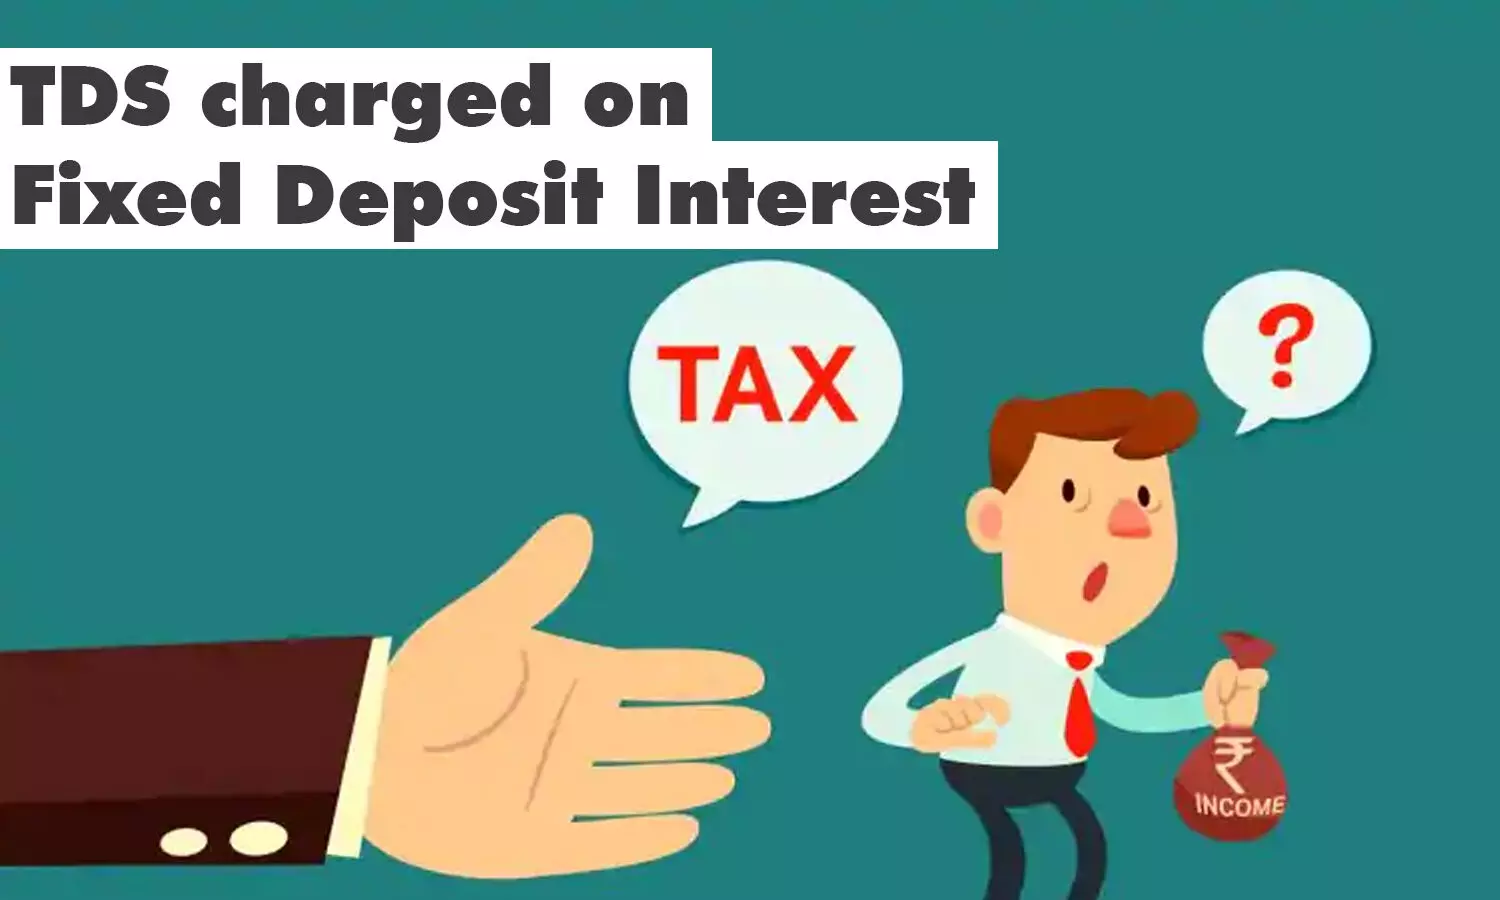 Why is the TDS charged on Fixed Deposit Interest? What are the TDS rates applied on FD?